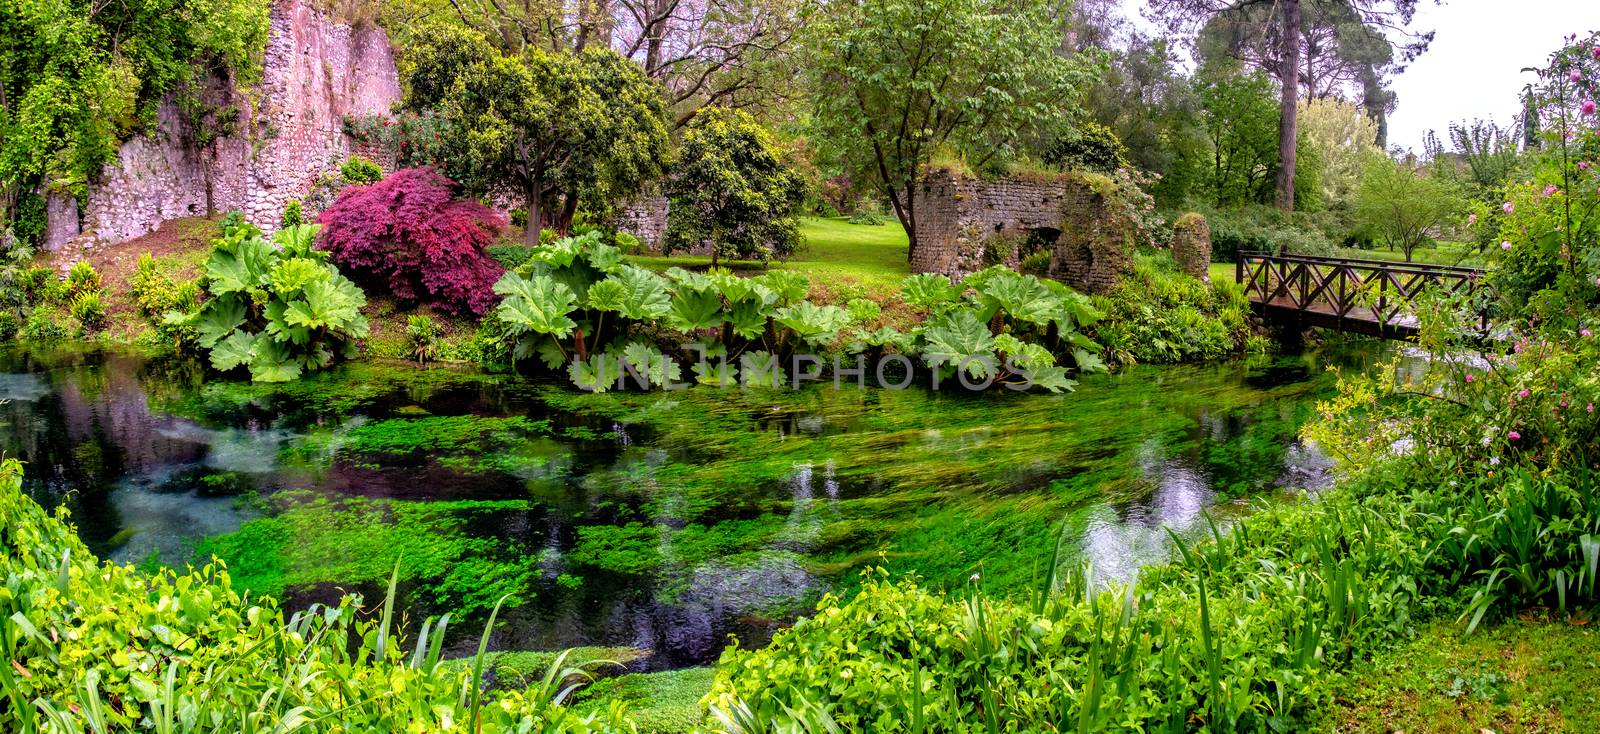 lush vegetetation musk in river water and garden with wooden bridge panoramic by LucaLorenzelli